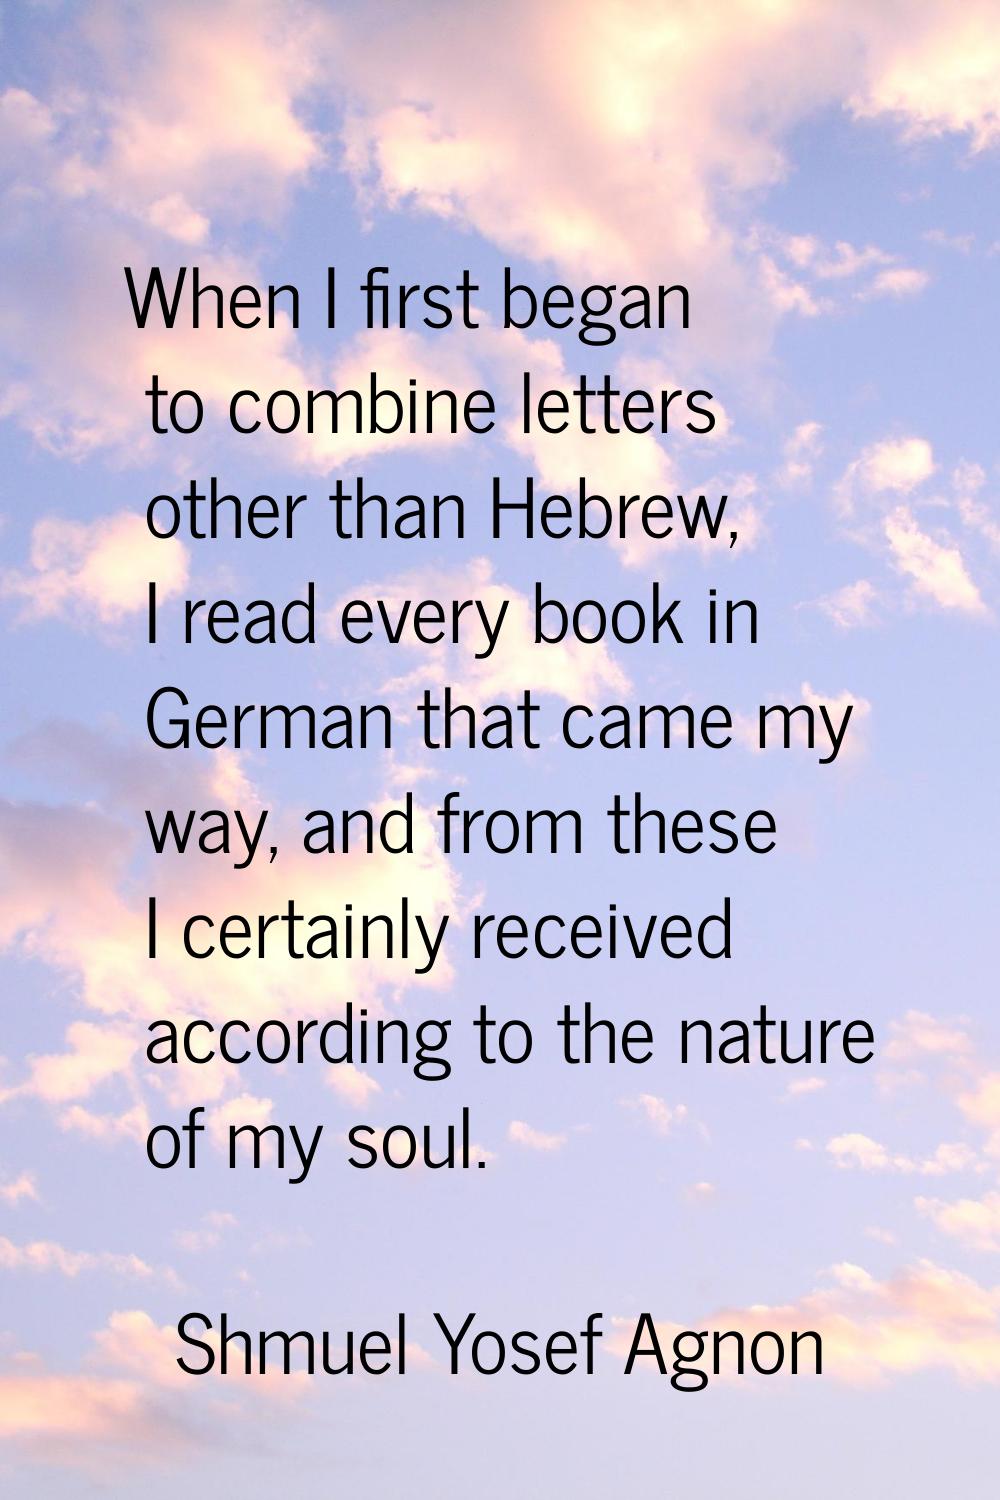 When I first began to combine letters other than Hebrew, I read every book in German that came my w